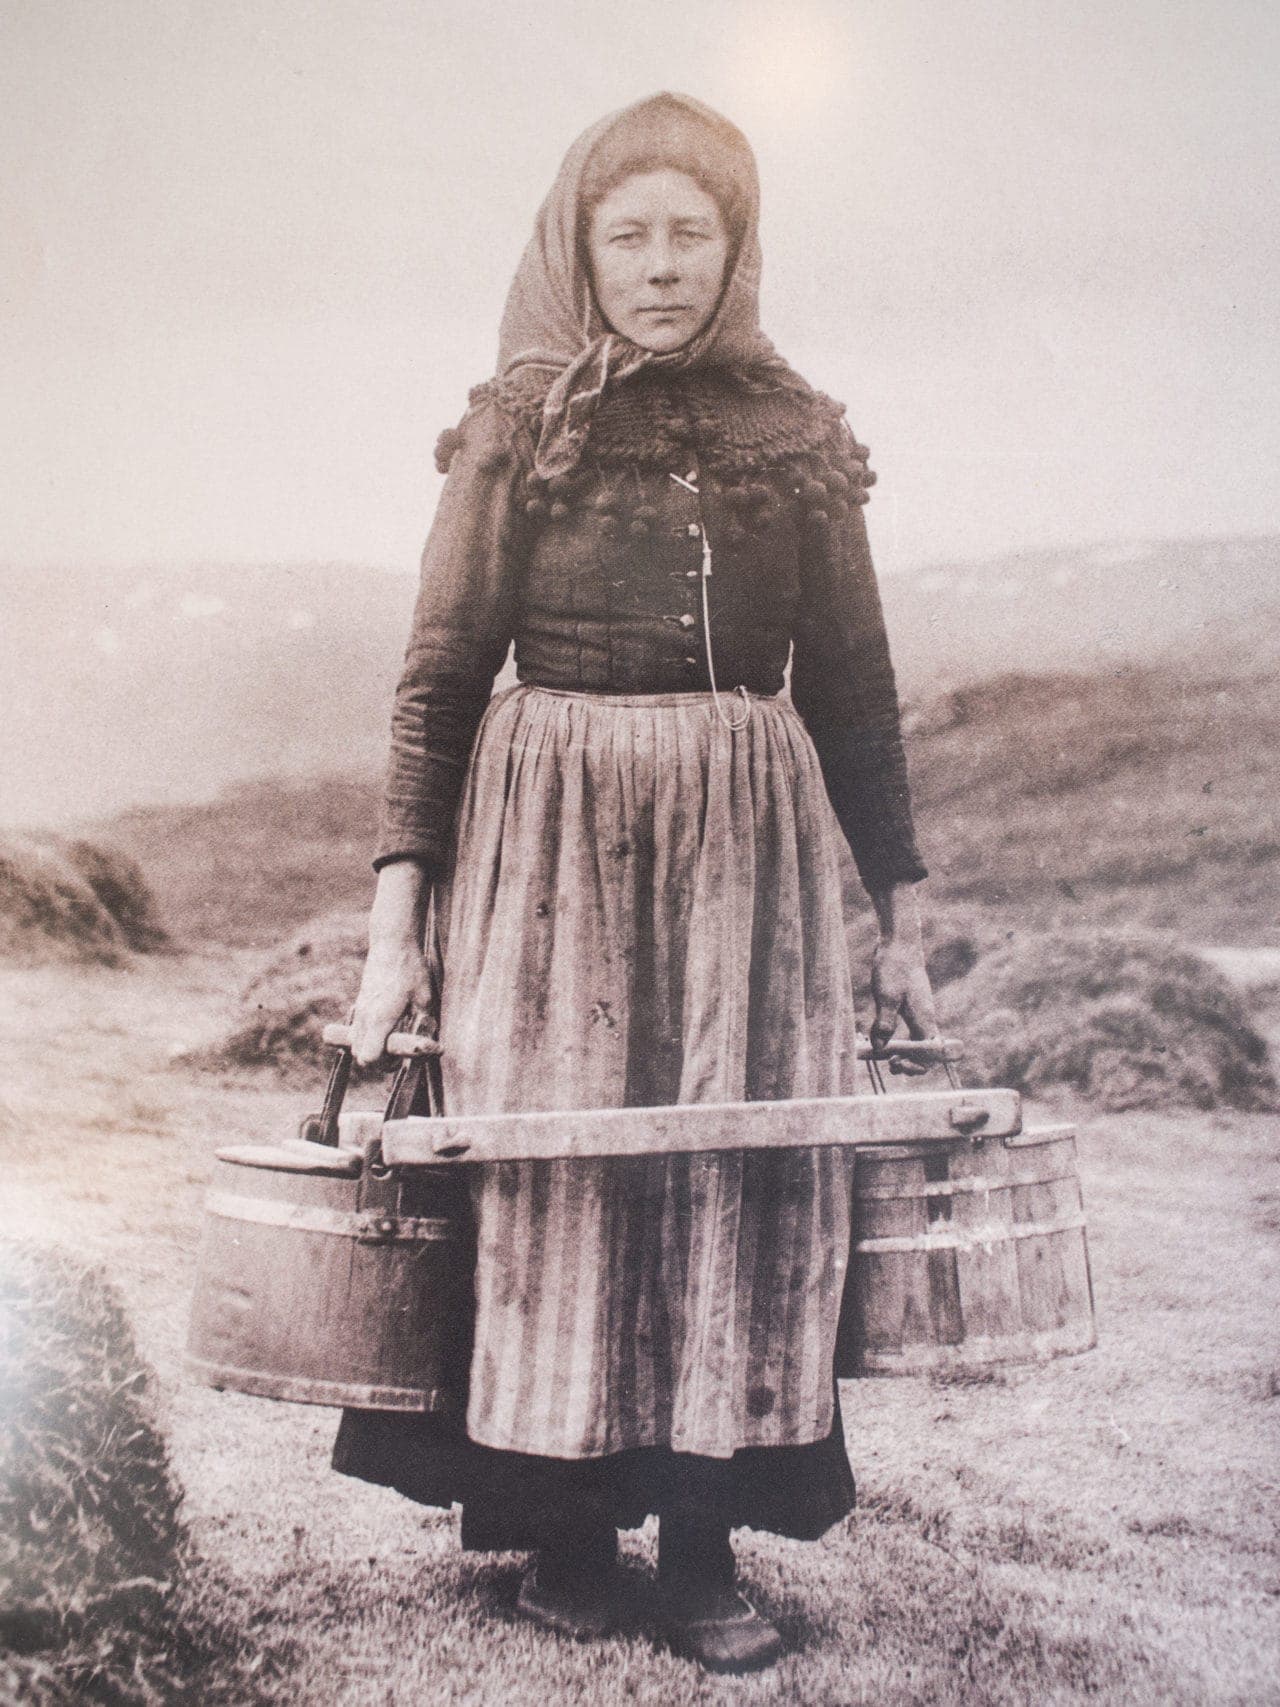 Woven woollen clothes worn by Icelandic farming women in the late 1800s.